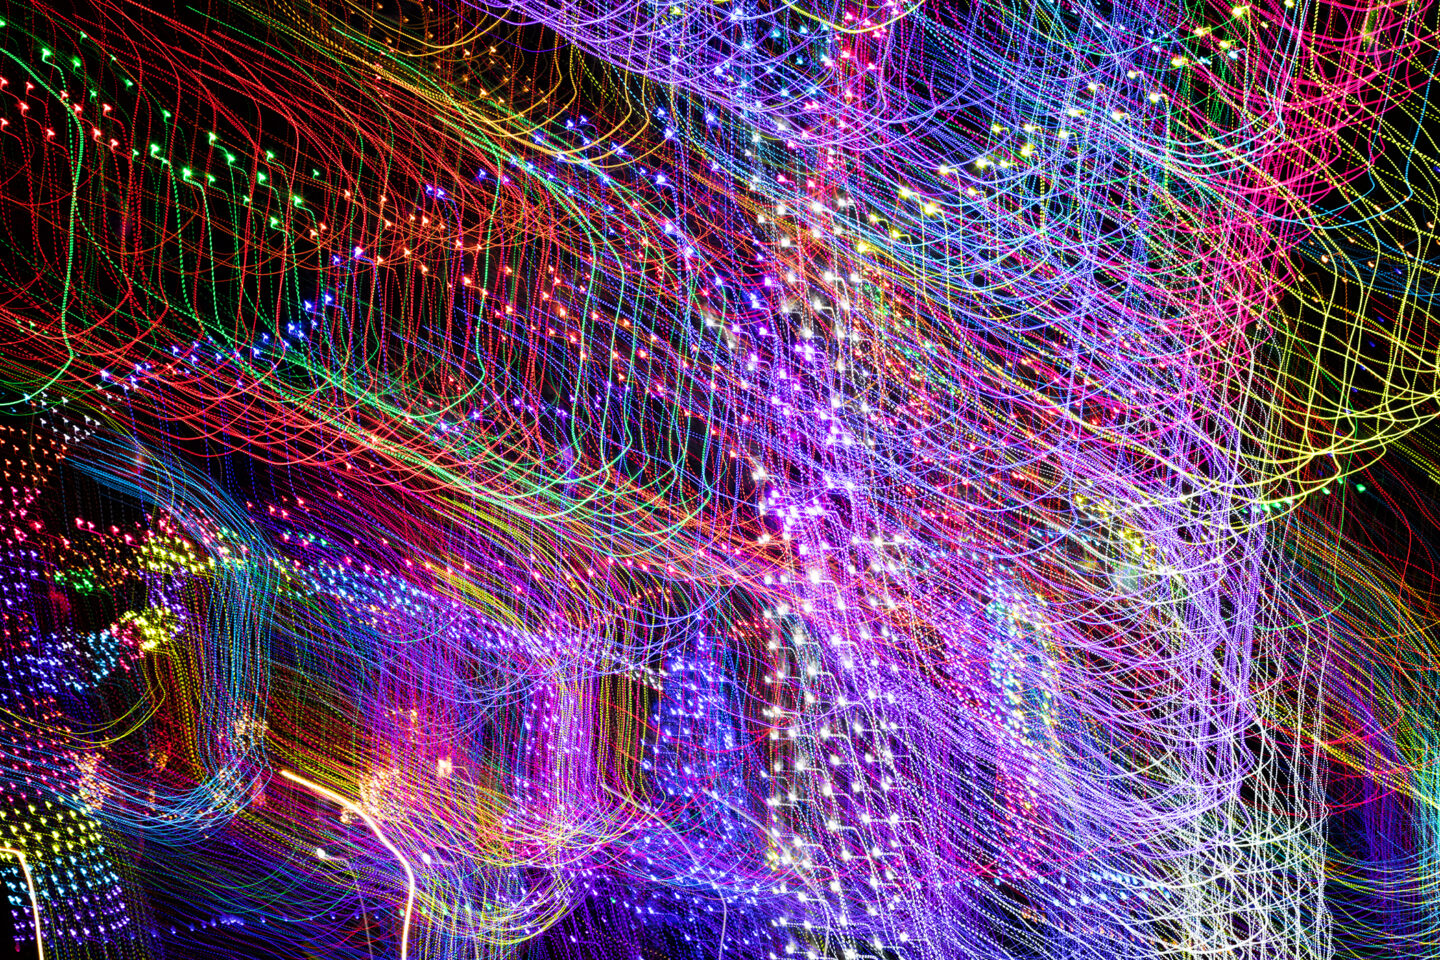 Abstract image of holiday lights from Round Rock, Texas in the Forrest Creek area 